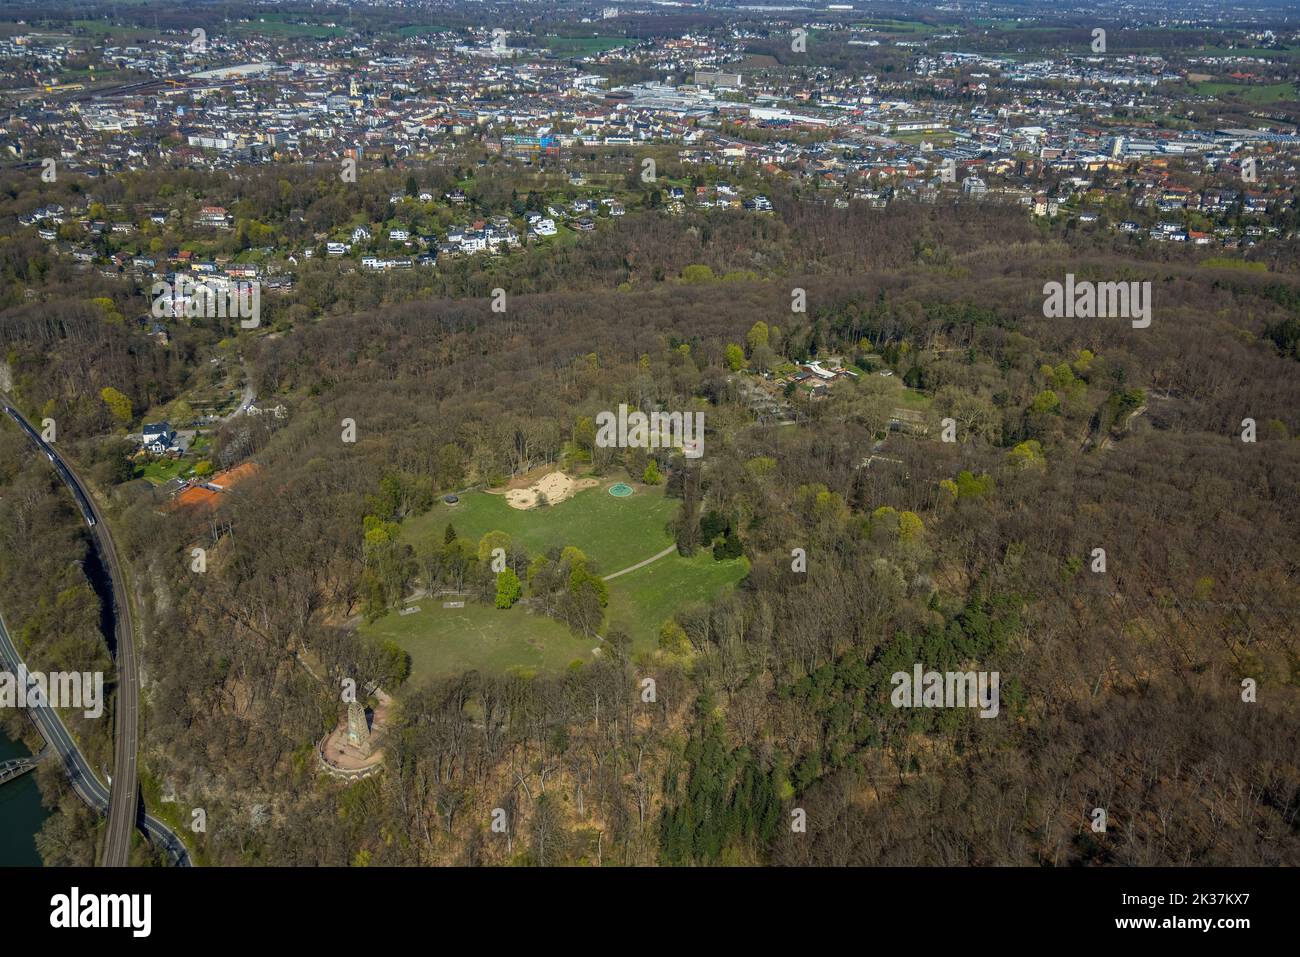 Aerial view, Hohenstein forest area with mountain monument, lawn and children's playground, petting zoo, Witten, Ruhr area, North Rhine-Westphalia, Ge Stock Photo